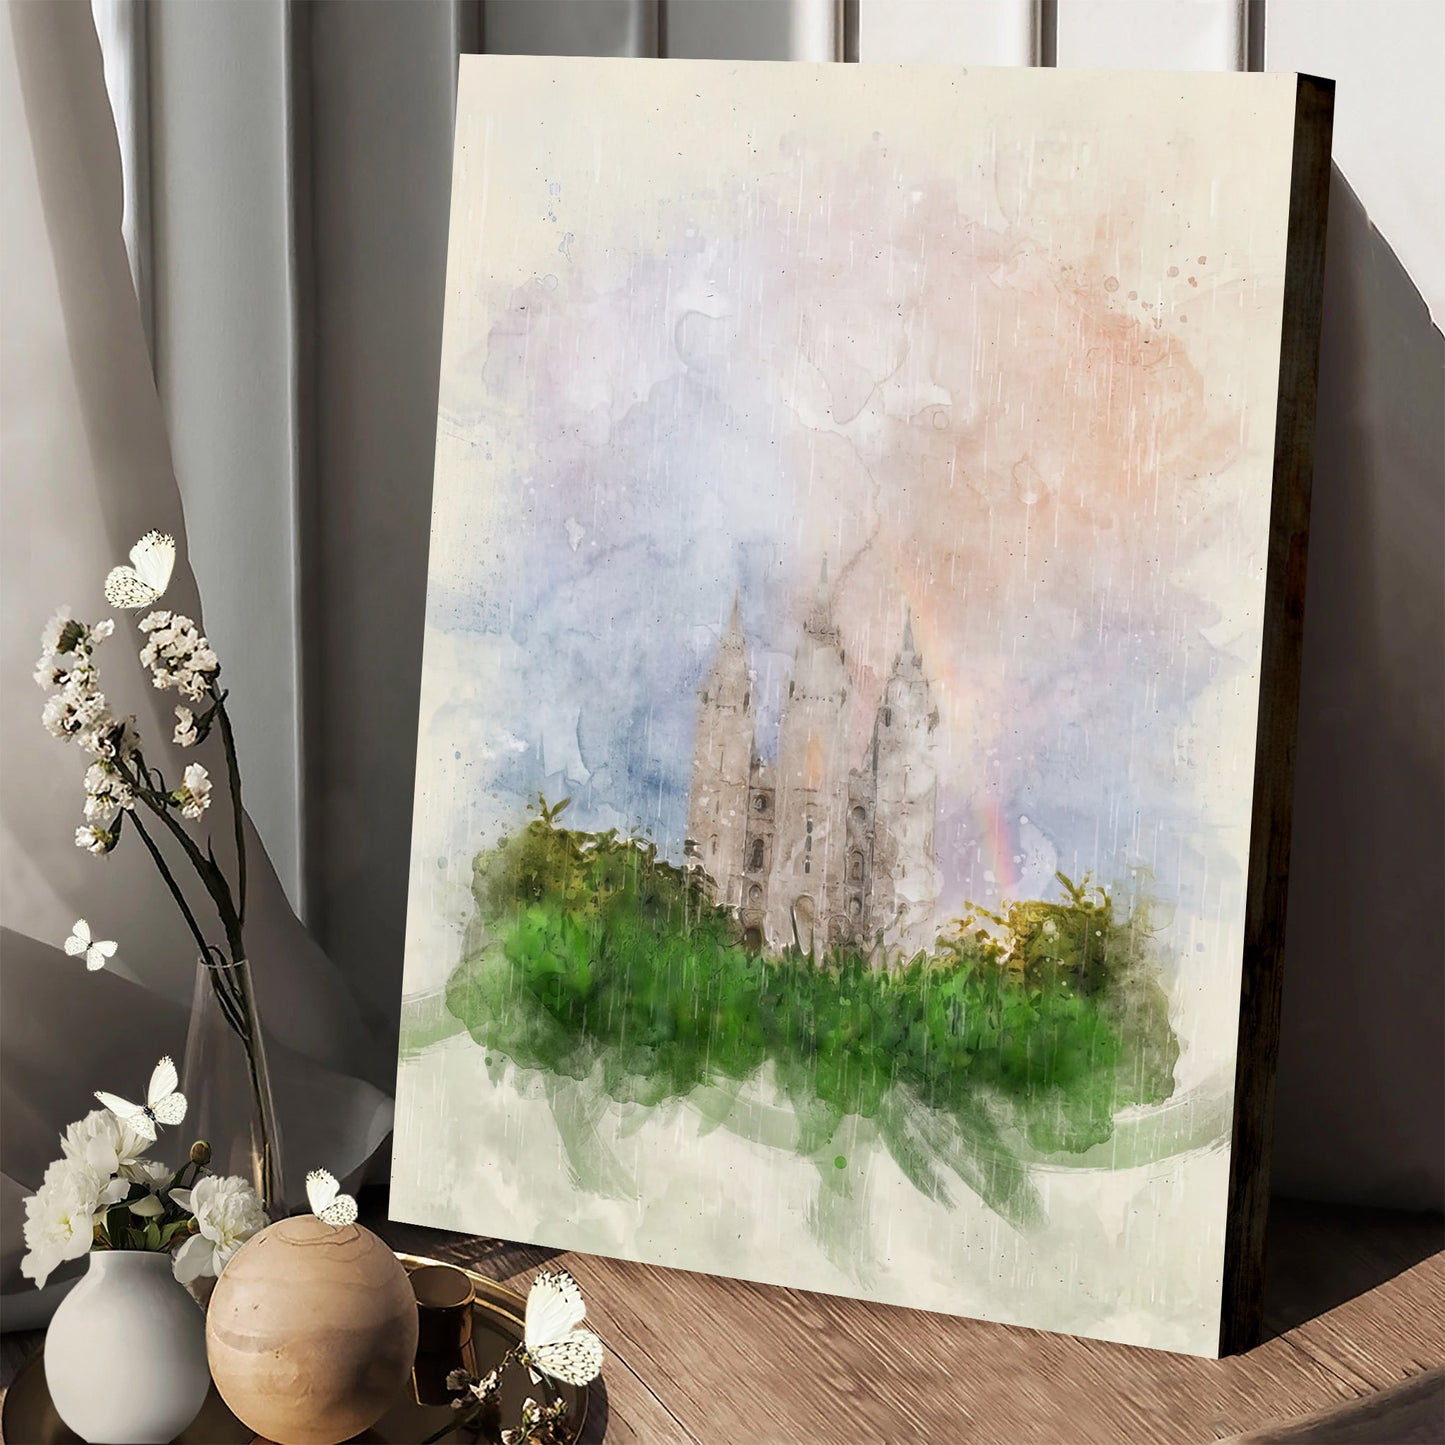 Salt Lake Temple Canvas Pictures - Temple Canvas Wall Decor - Christian Canvas Wall Art